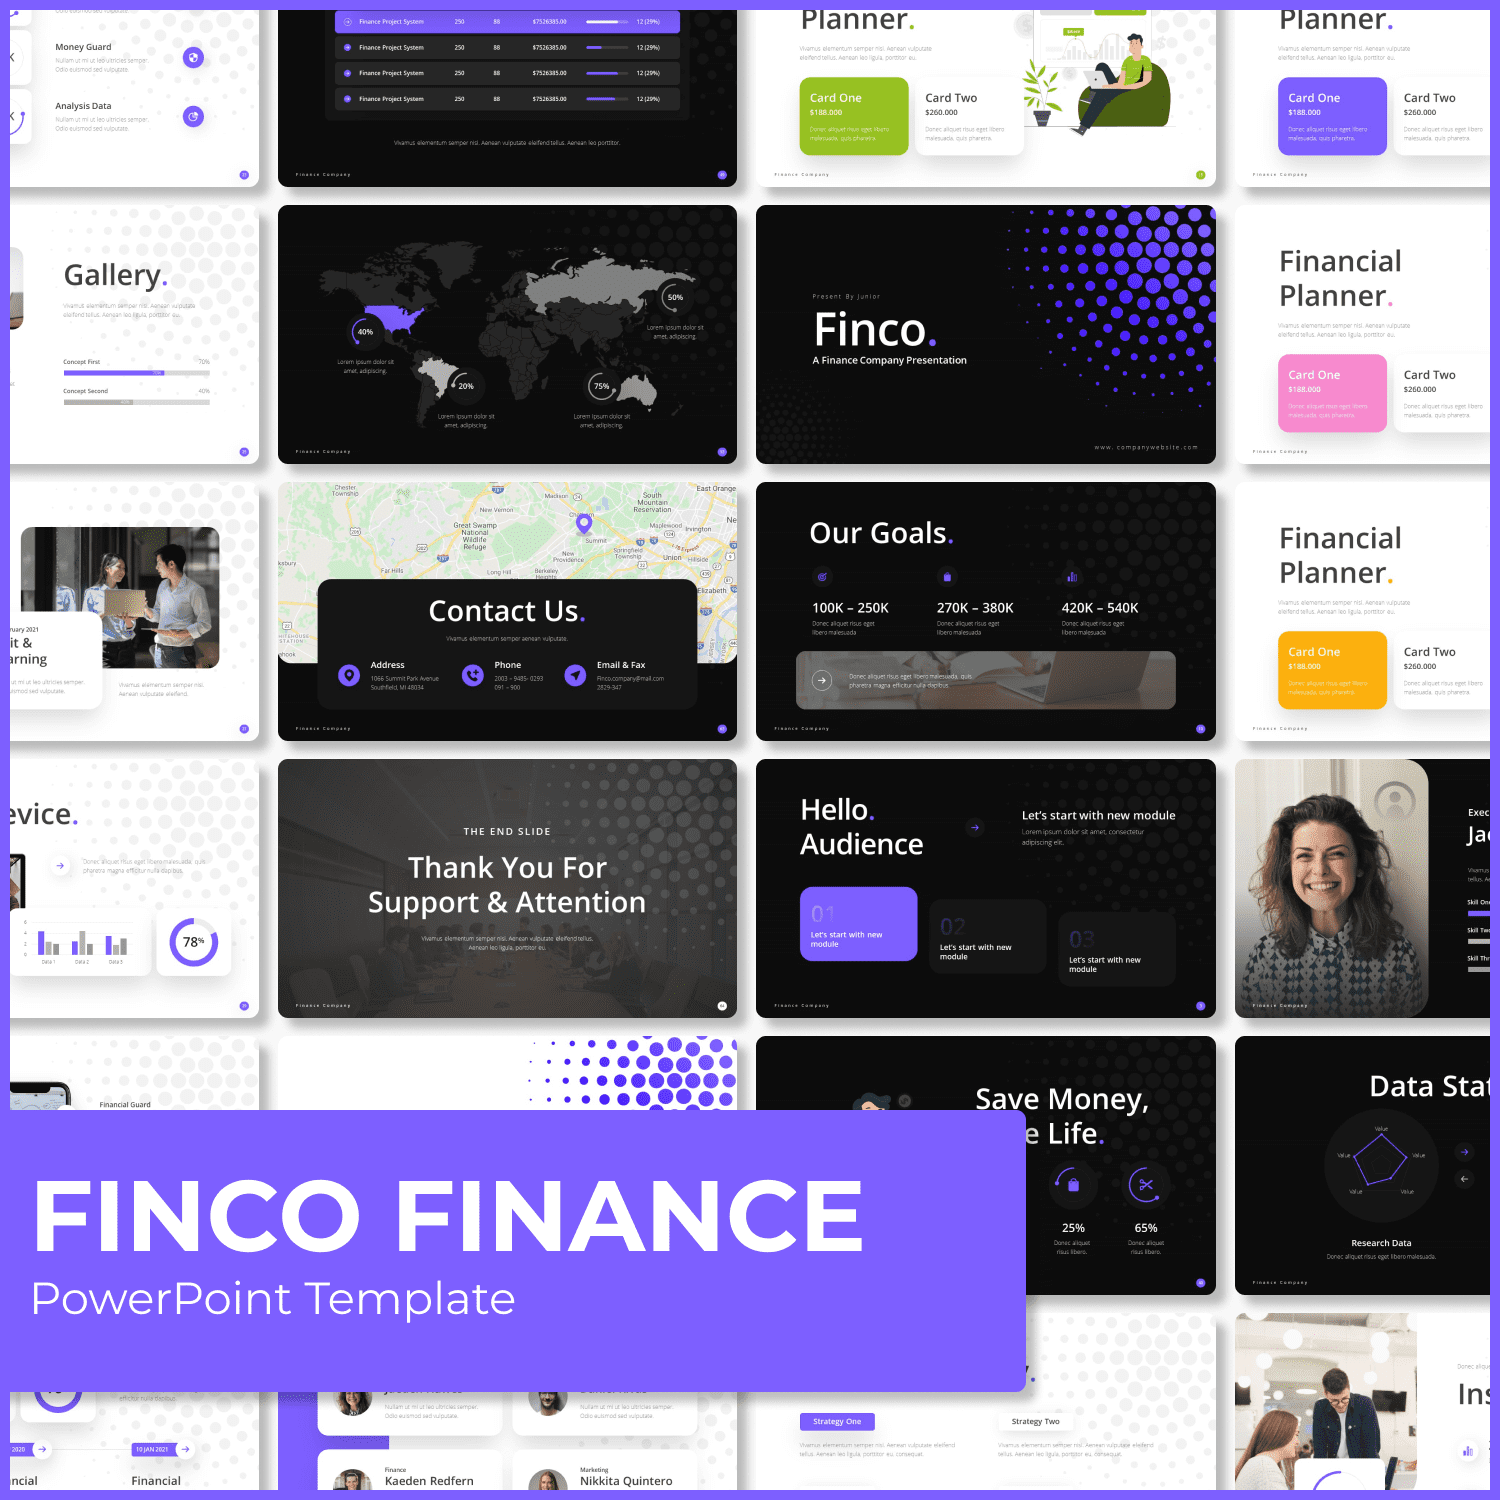 Tablet option of the Finco Finance PowerPoint Template.